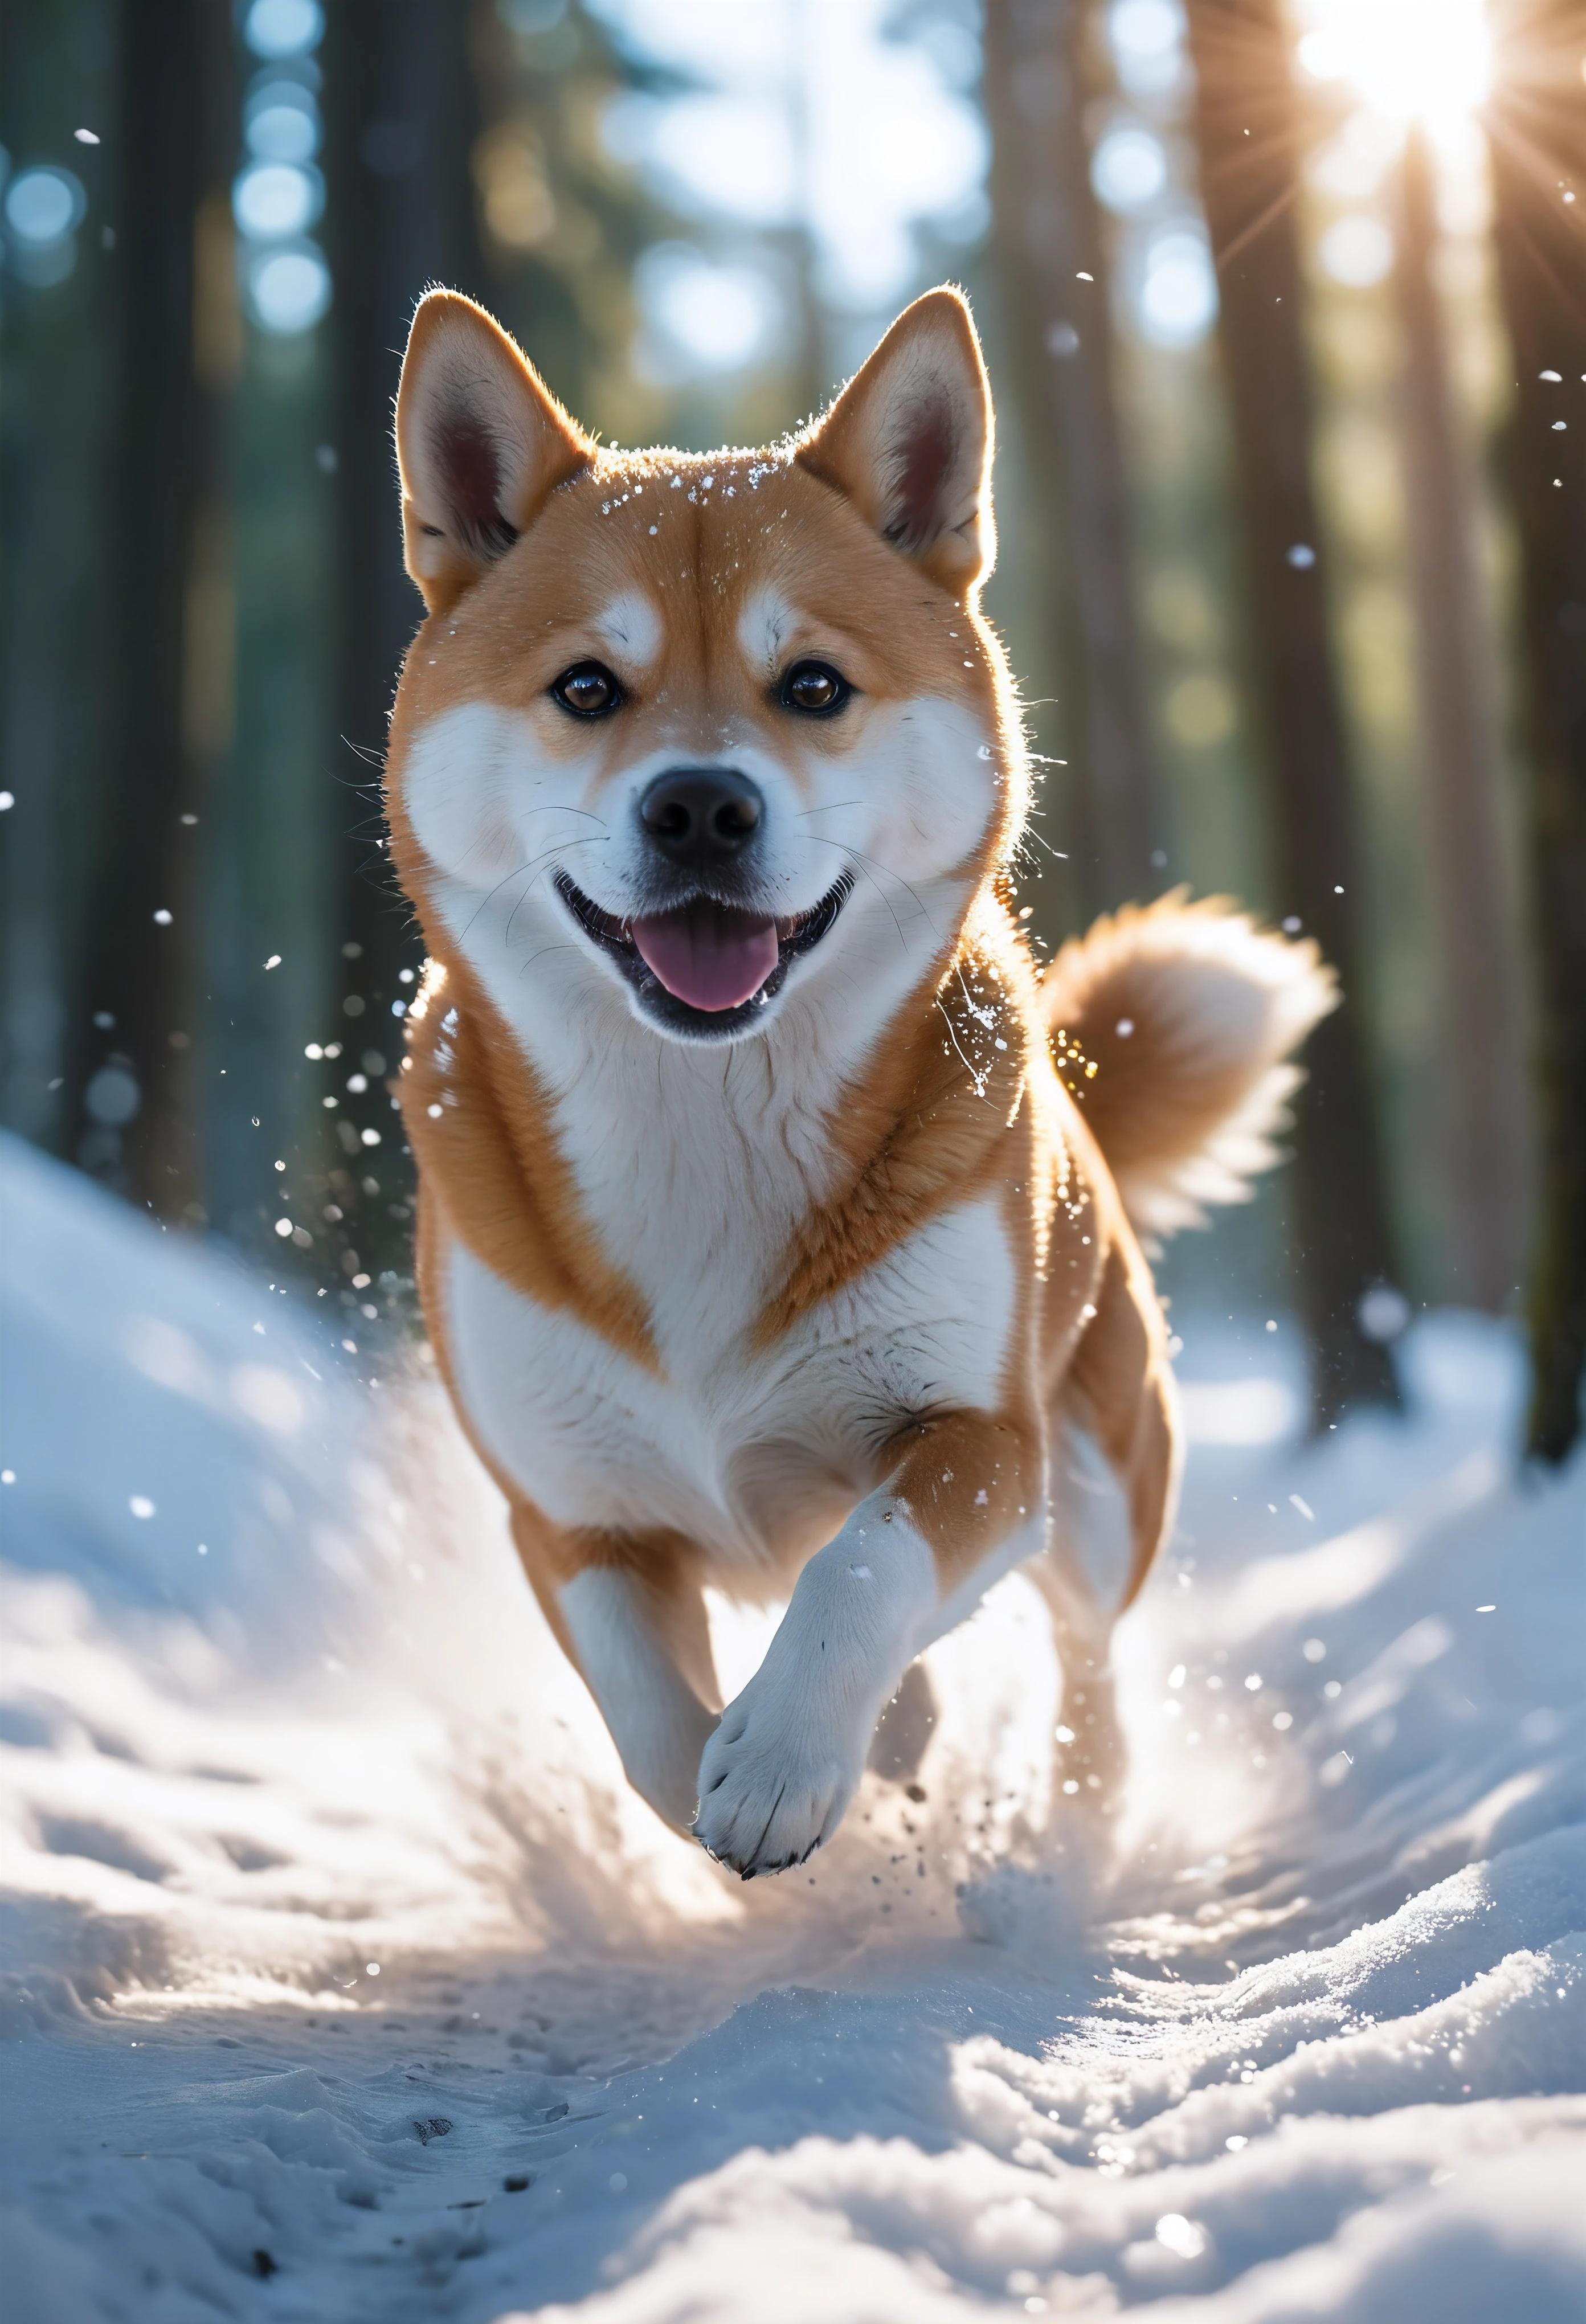 ((Masterpiece in maximum 16K resolution):1.6),((soft_color_photograpy:)1.5), ((Ultra-Detailed):1.4),((Movie-like still images and dynamic angles):1.3). | (Macro shot cinematic photo of a Shiba Inu running through a snowy forest), ((Cute japanese dog):1.2), ((a dog running):1.1), (A clear sky), (macro lens), (Happy atmosphere), (shimmer), (visual experience),(Realism), (Realistic),award-winning graphics, film grain, extremely detailed, Digital Art, rtx, Unreal Engine, scene concept anti glare effect, All captured with sharp focus. | Rendered in ultra-high definition with UHD and retina quality, this masterpiece ensures anatomical correctness and textured skin with super detail. With a focus on high quality and accuracy, this award-winning portrayal captures every nuance in stunning 16k resolution, immersing viewers in its lifelike depiction. | ((perfect_composition, perfect_design, perfect_layout, perfect_detail, ultra_detailed)), ((enhance_all, fix_everything)), More Detail, Enhance.